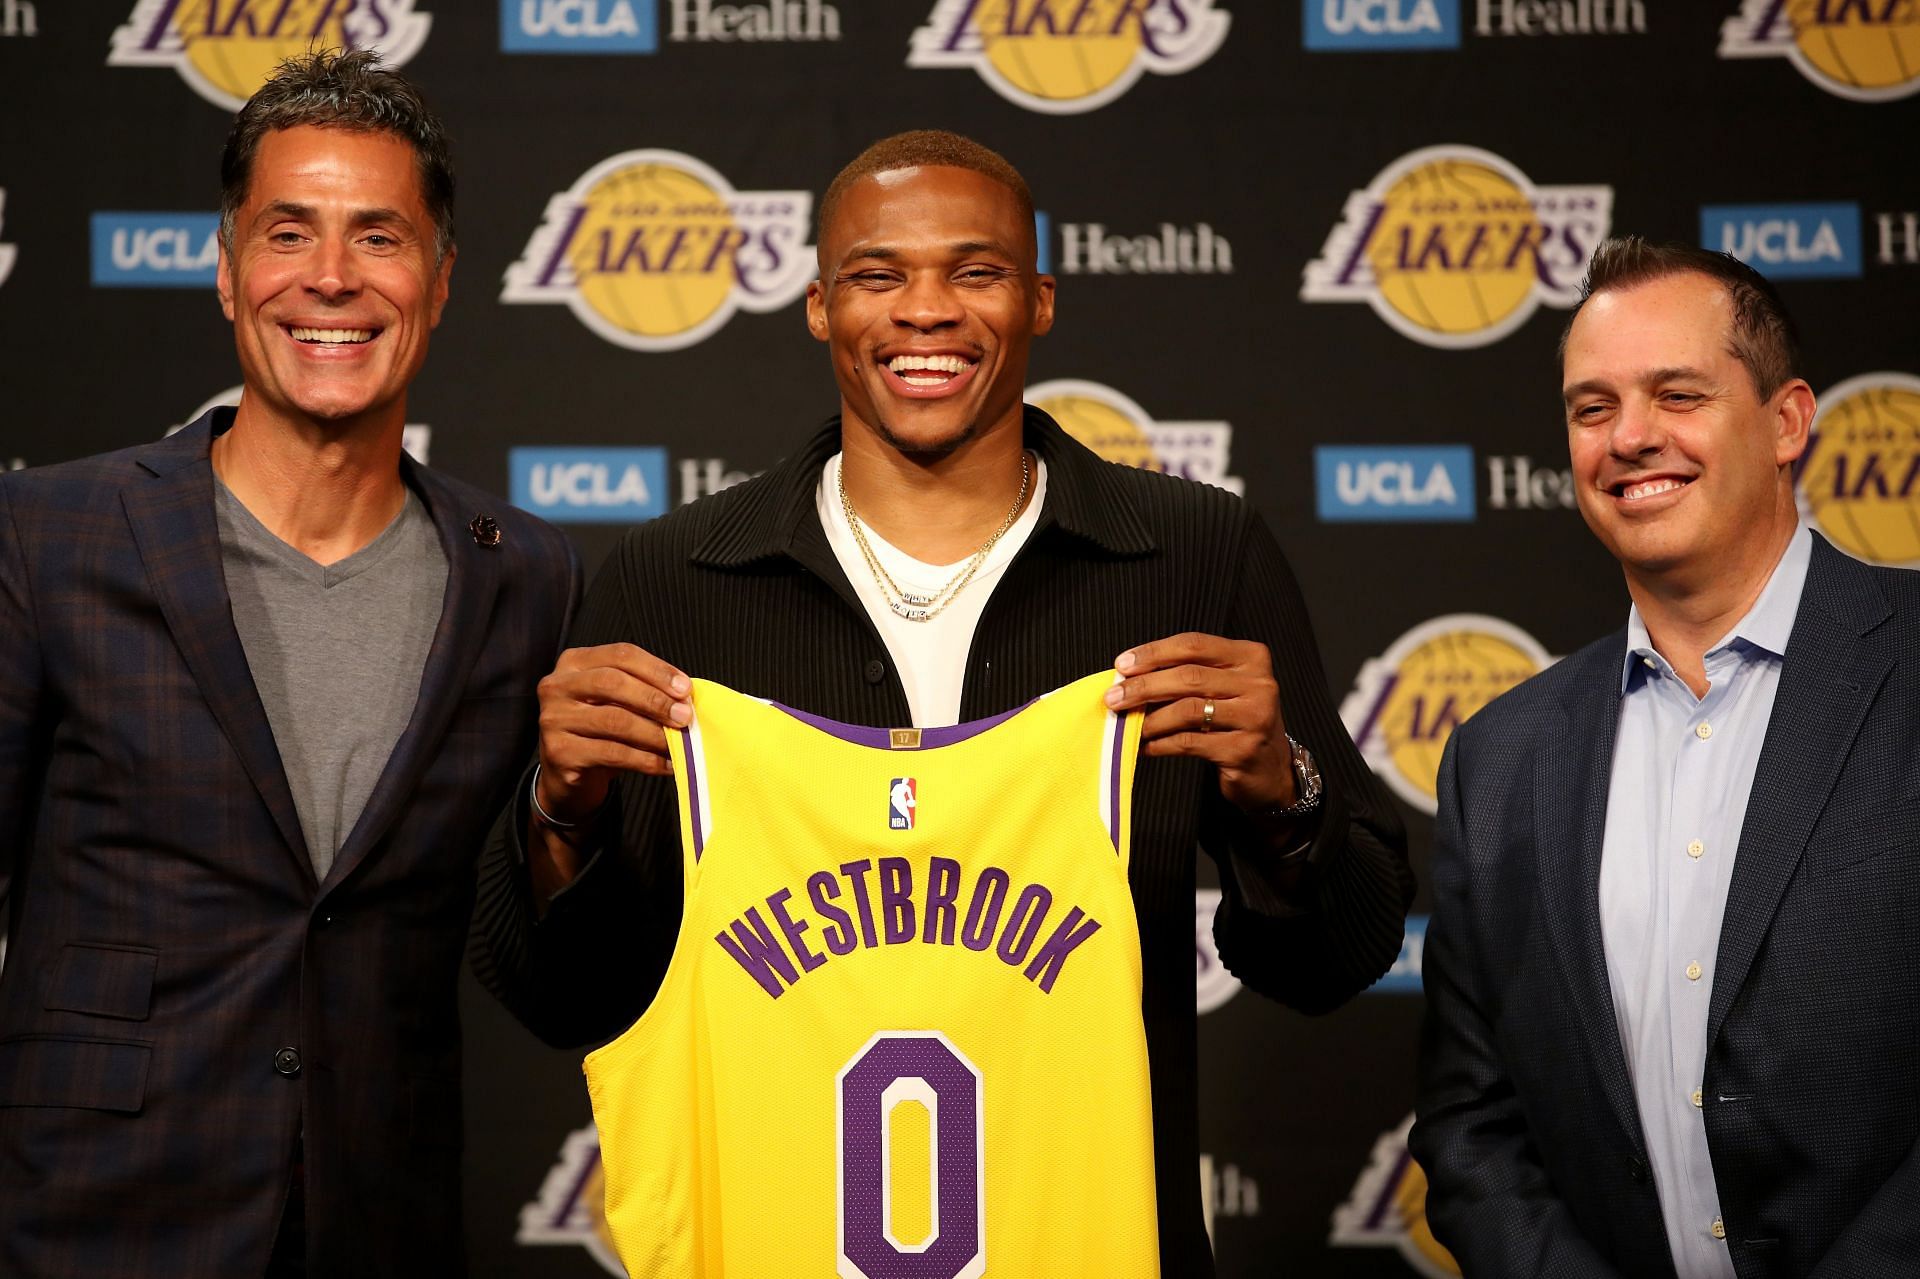 Russell Westbrook made his debut as an LA Laker on October 19th against the Golden State Warriors.